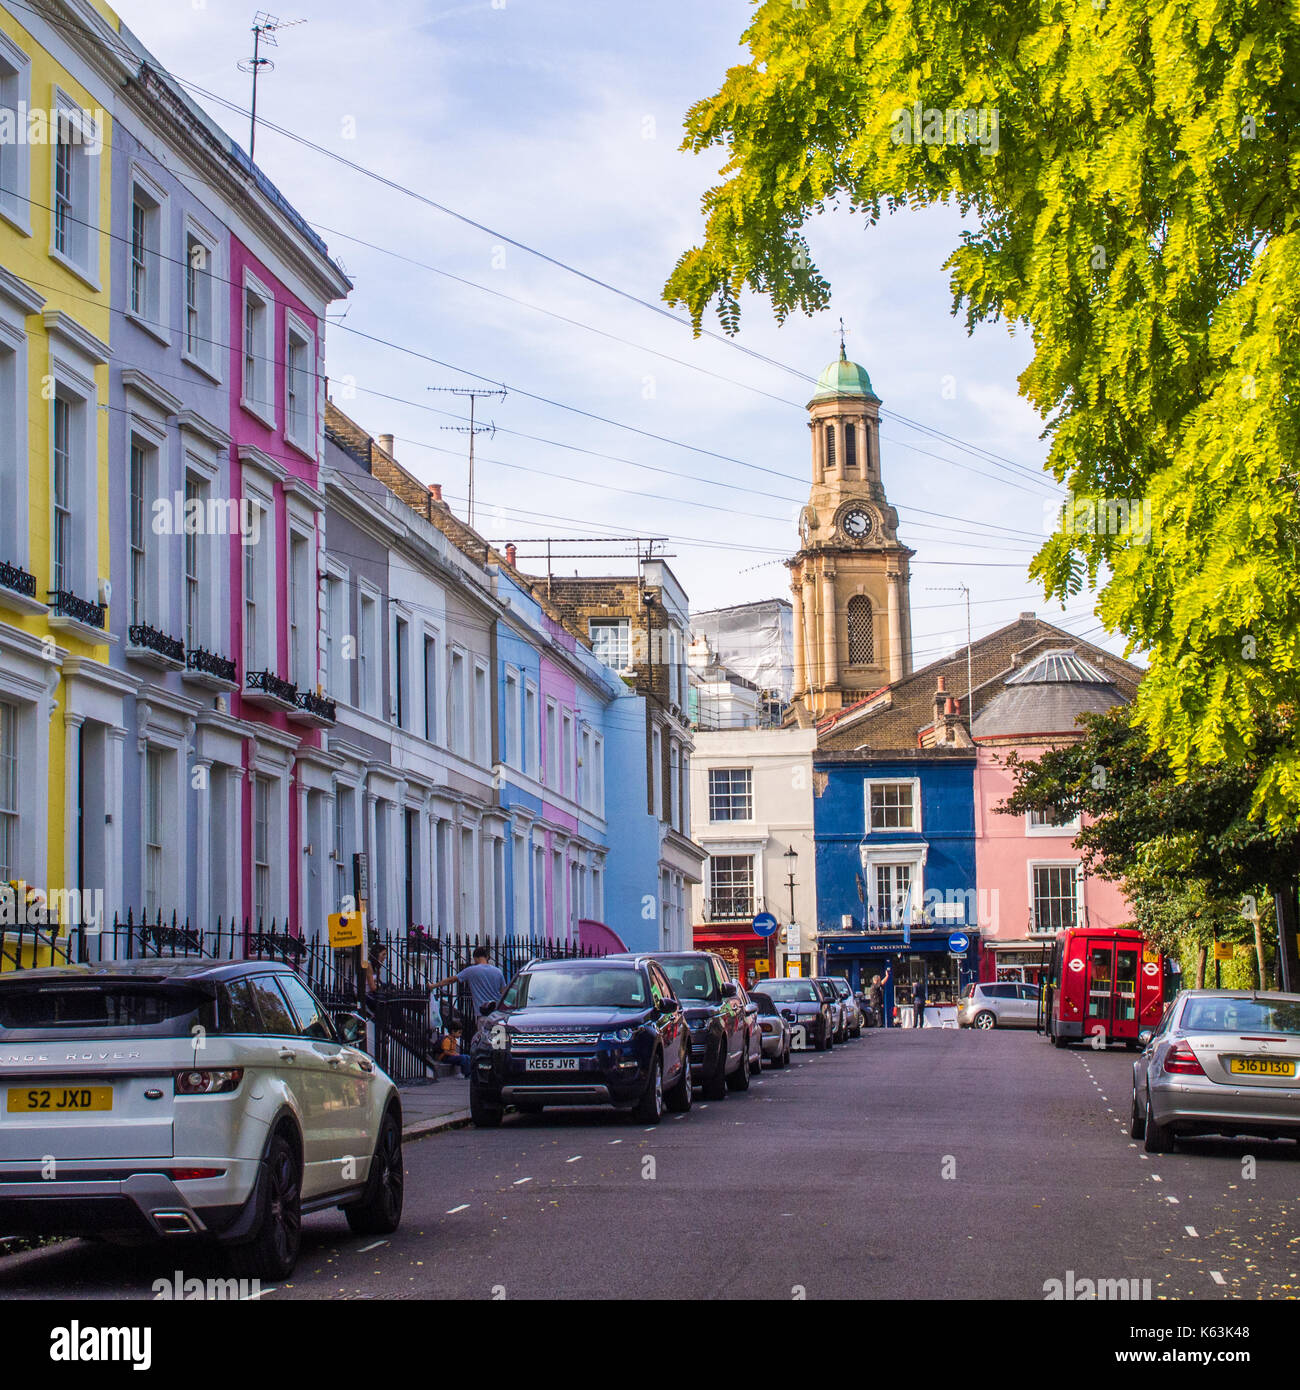 Looking toward the colourful properties on Portabello Road, Notting Hill area, London Stock Photo